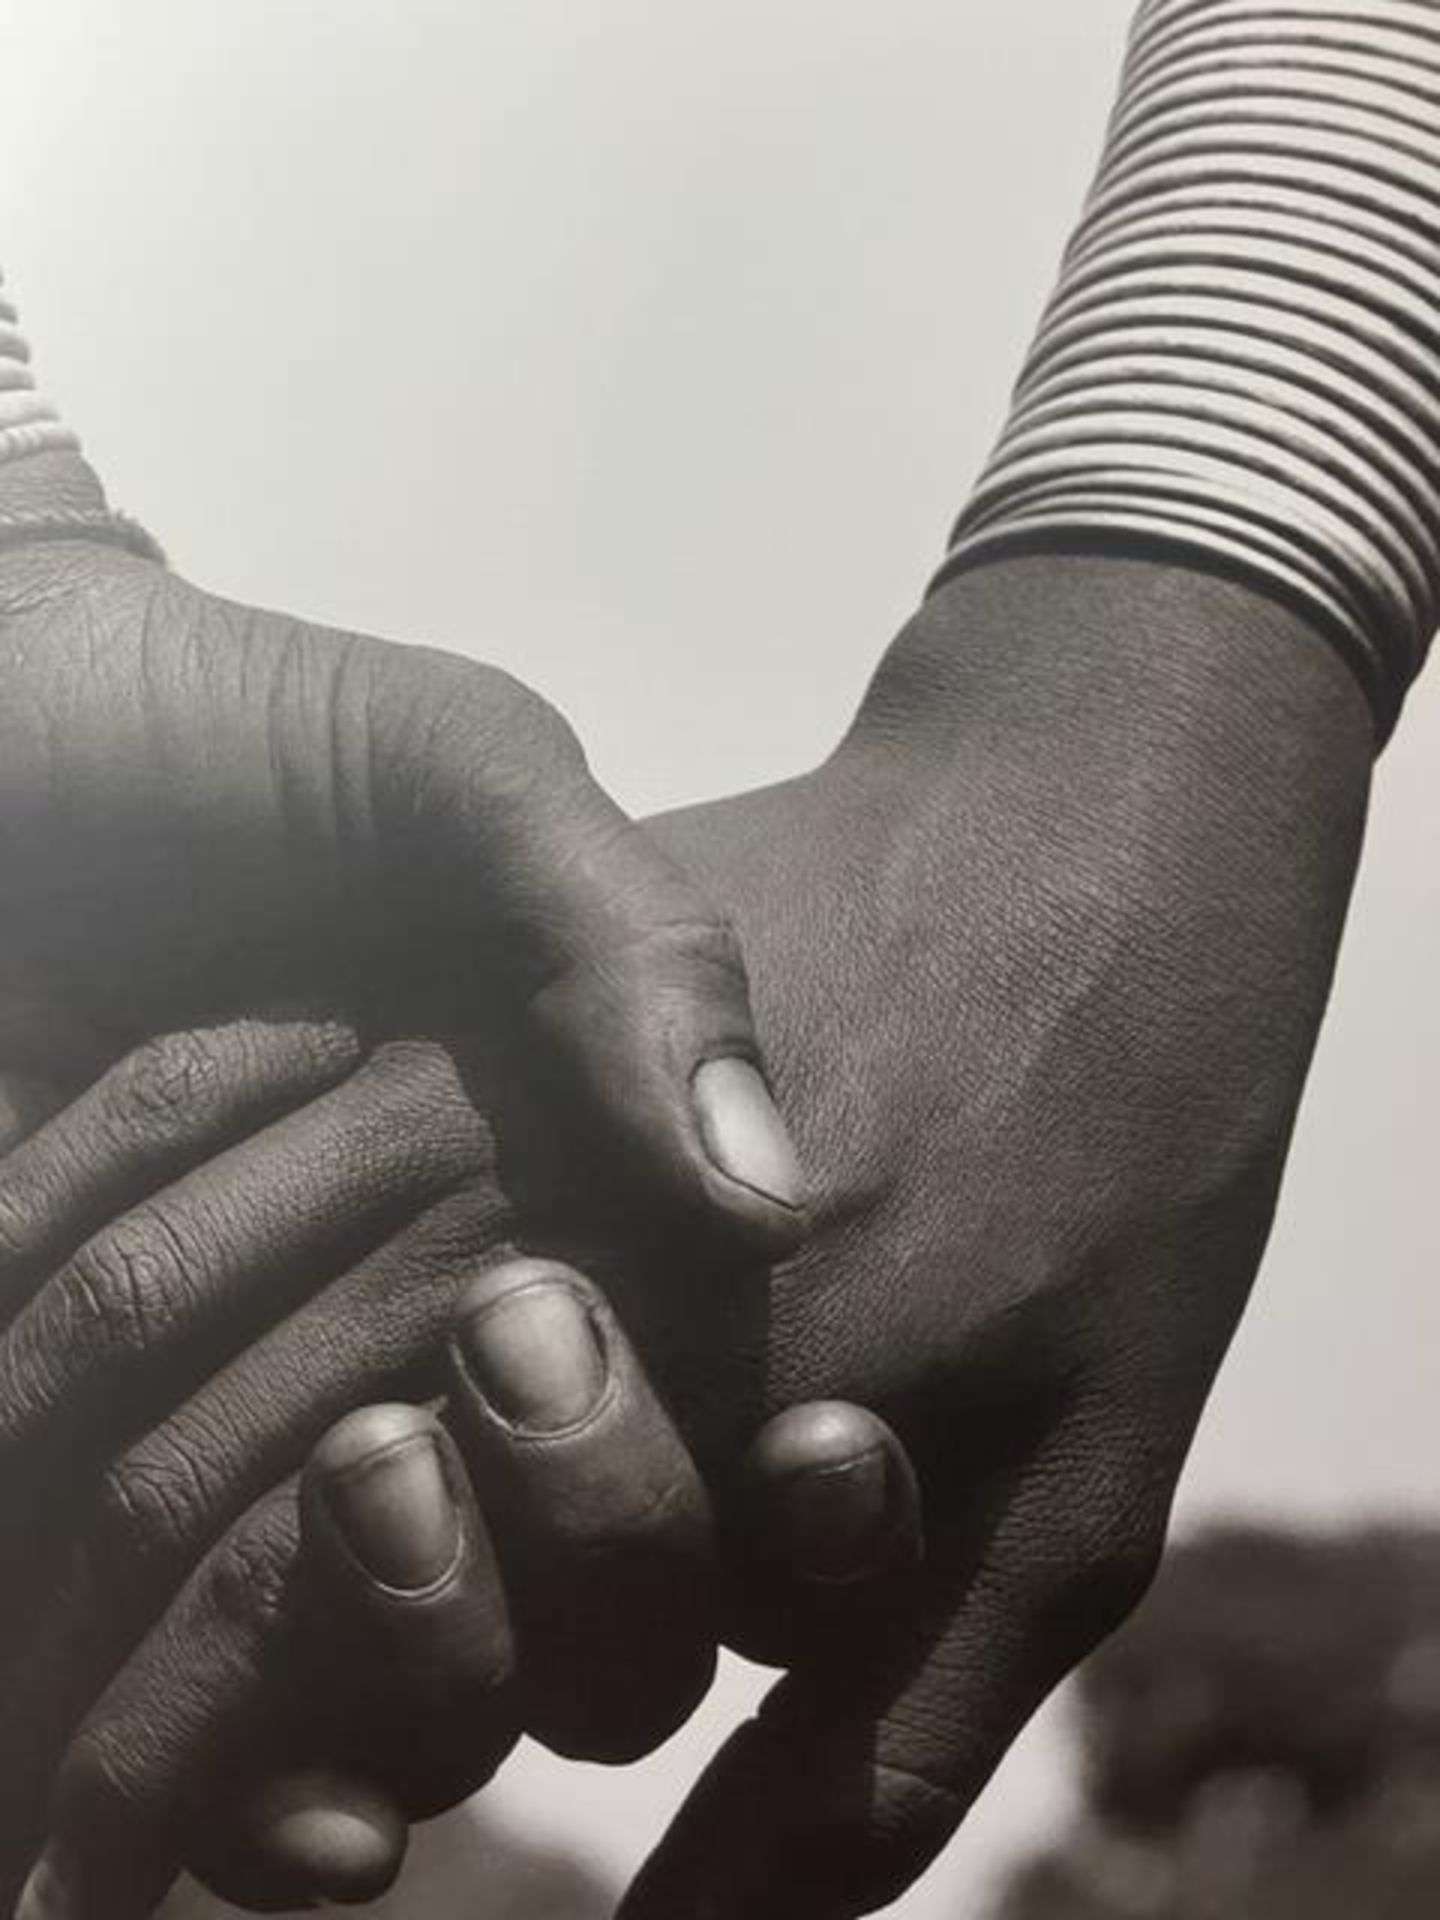 Herb Ritts "Untitled" Print. - Image 10 of 12